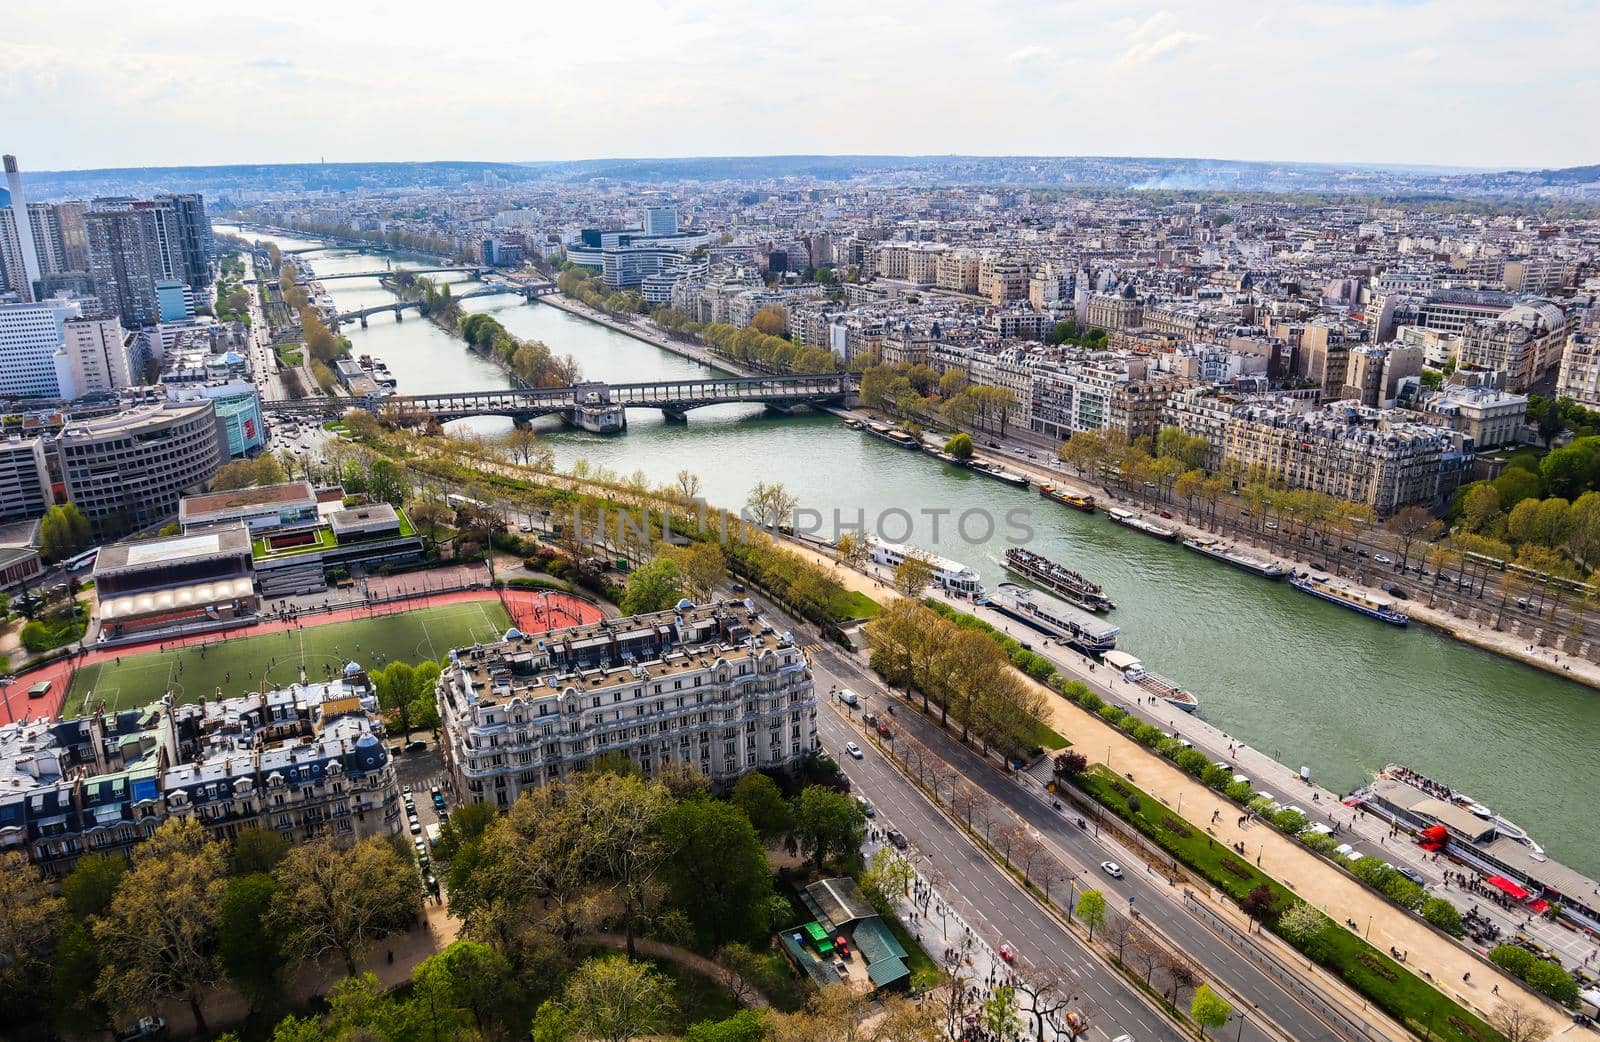 Aerial view of Paris city and Seine river from Eiffel Tower. France. April 2019 by Olayola